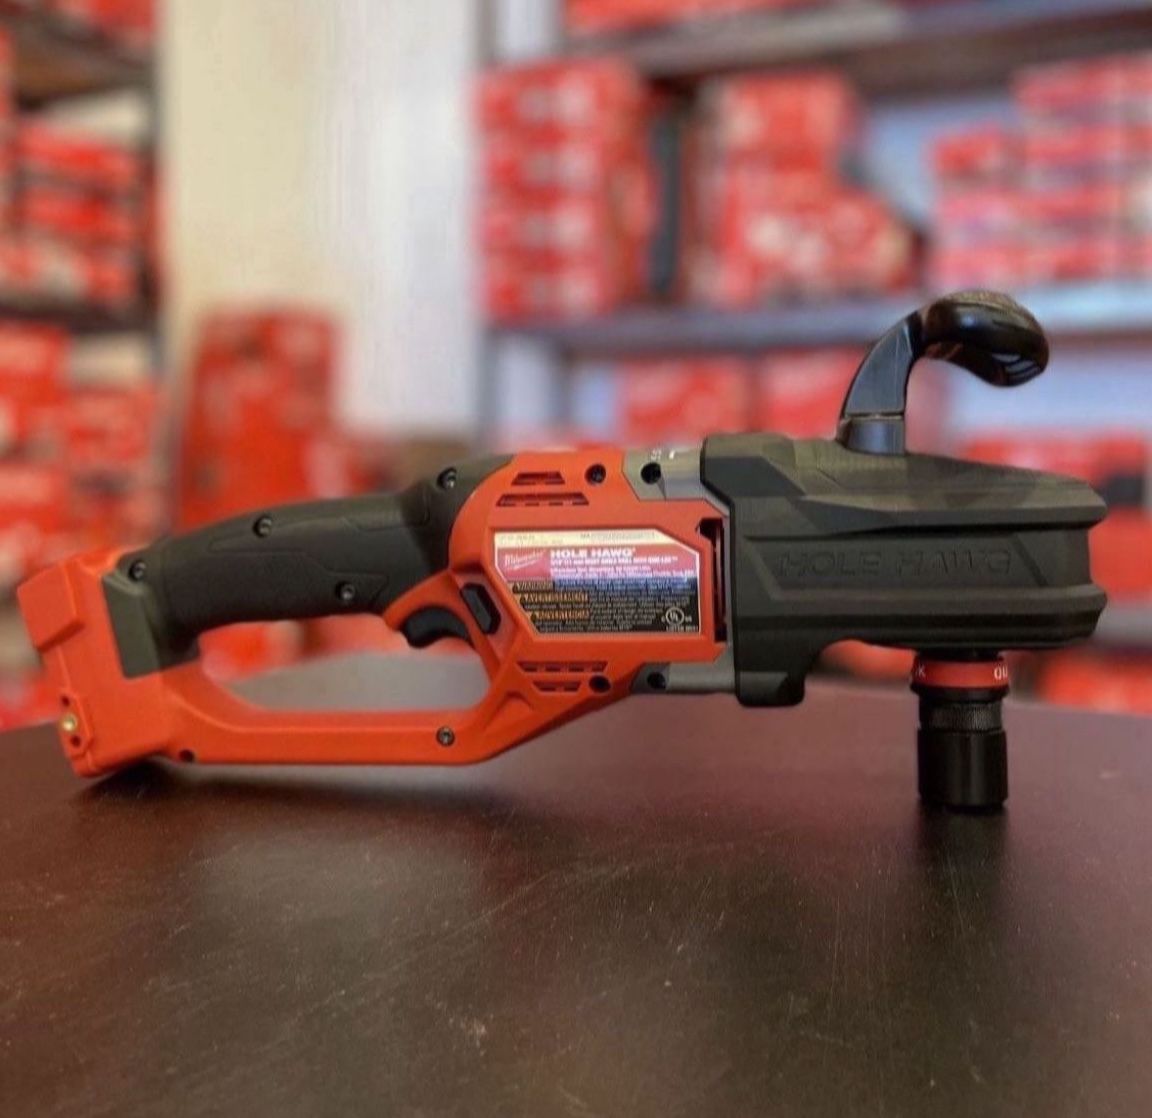 MILWAUKEE M18 FUEL Lithium-Ion Brushless Cordless Hole Hawg 7/16 in. Right  Angle Drill W/ Quick-Lok (Tool-Only)….2808-20 for Sale in Las Vegas, NV  OfferUp